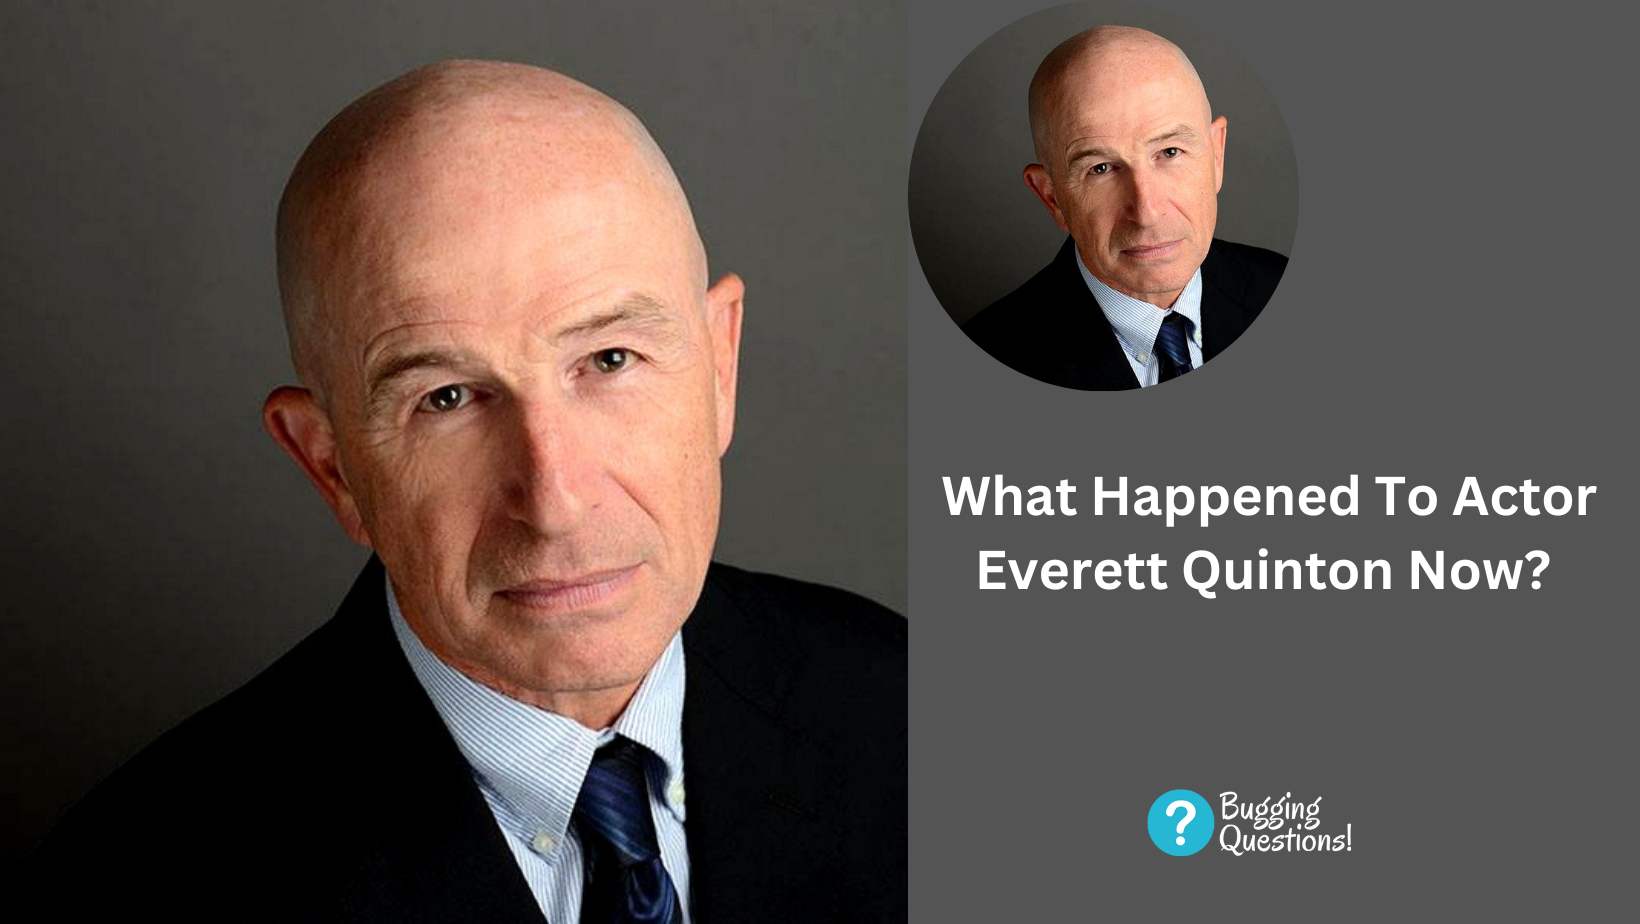 What Happened To Actor Everett Quinton Now?